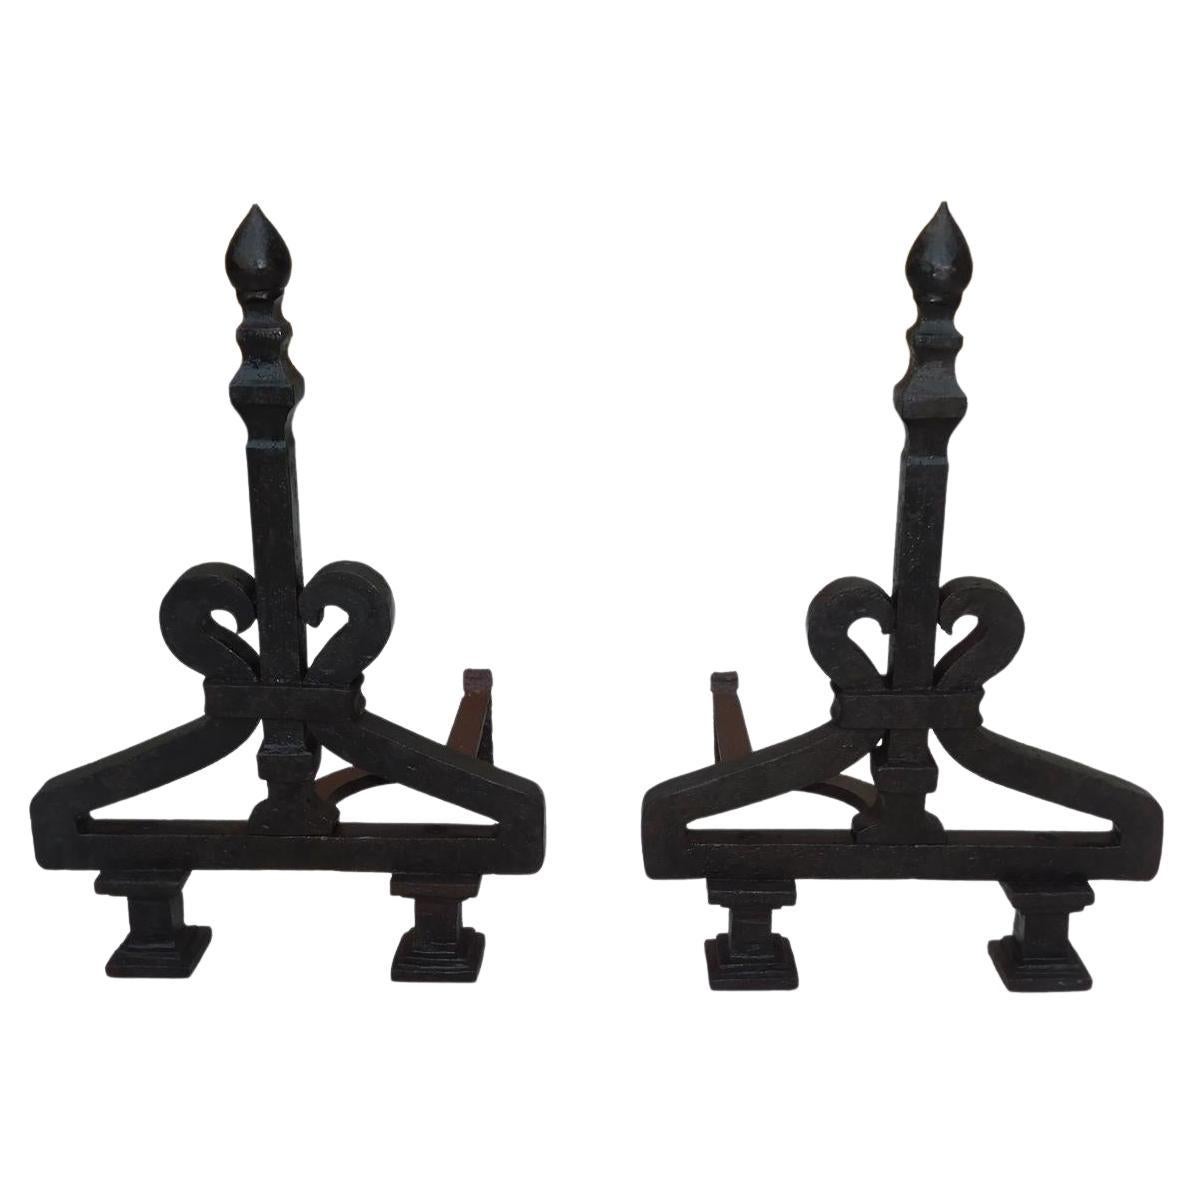 American Wrought Iron Faceted Lemon Finial Andirons w/ Scrolled Plinths, C. 1820 For Sale